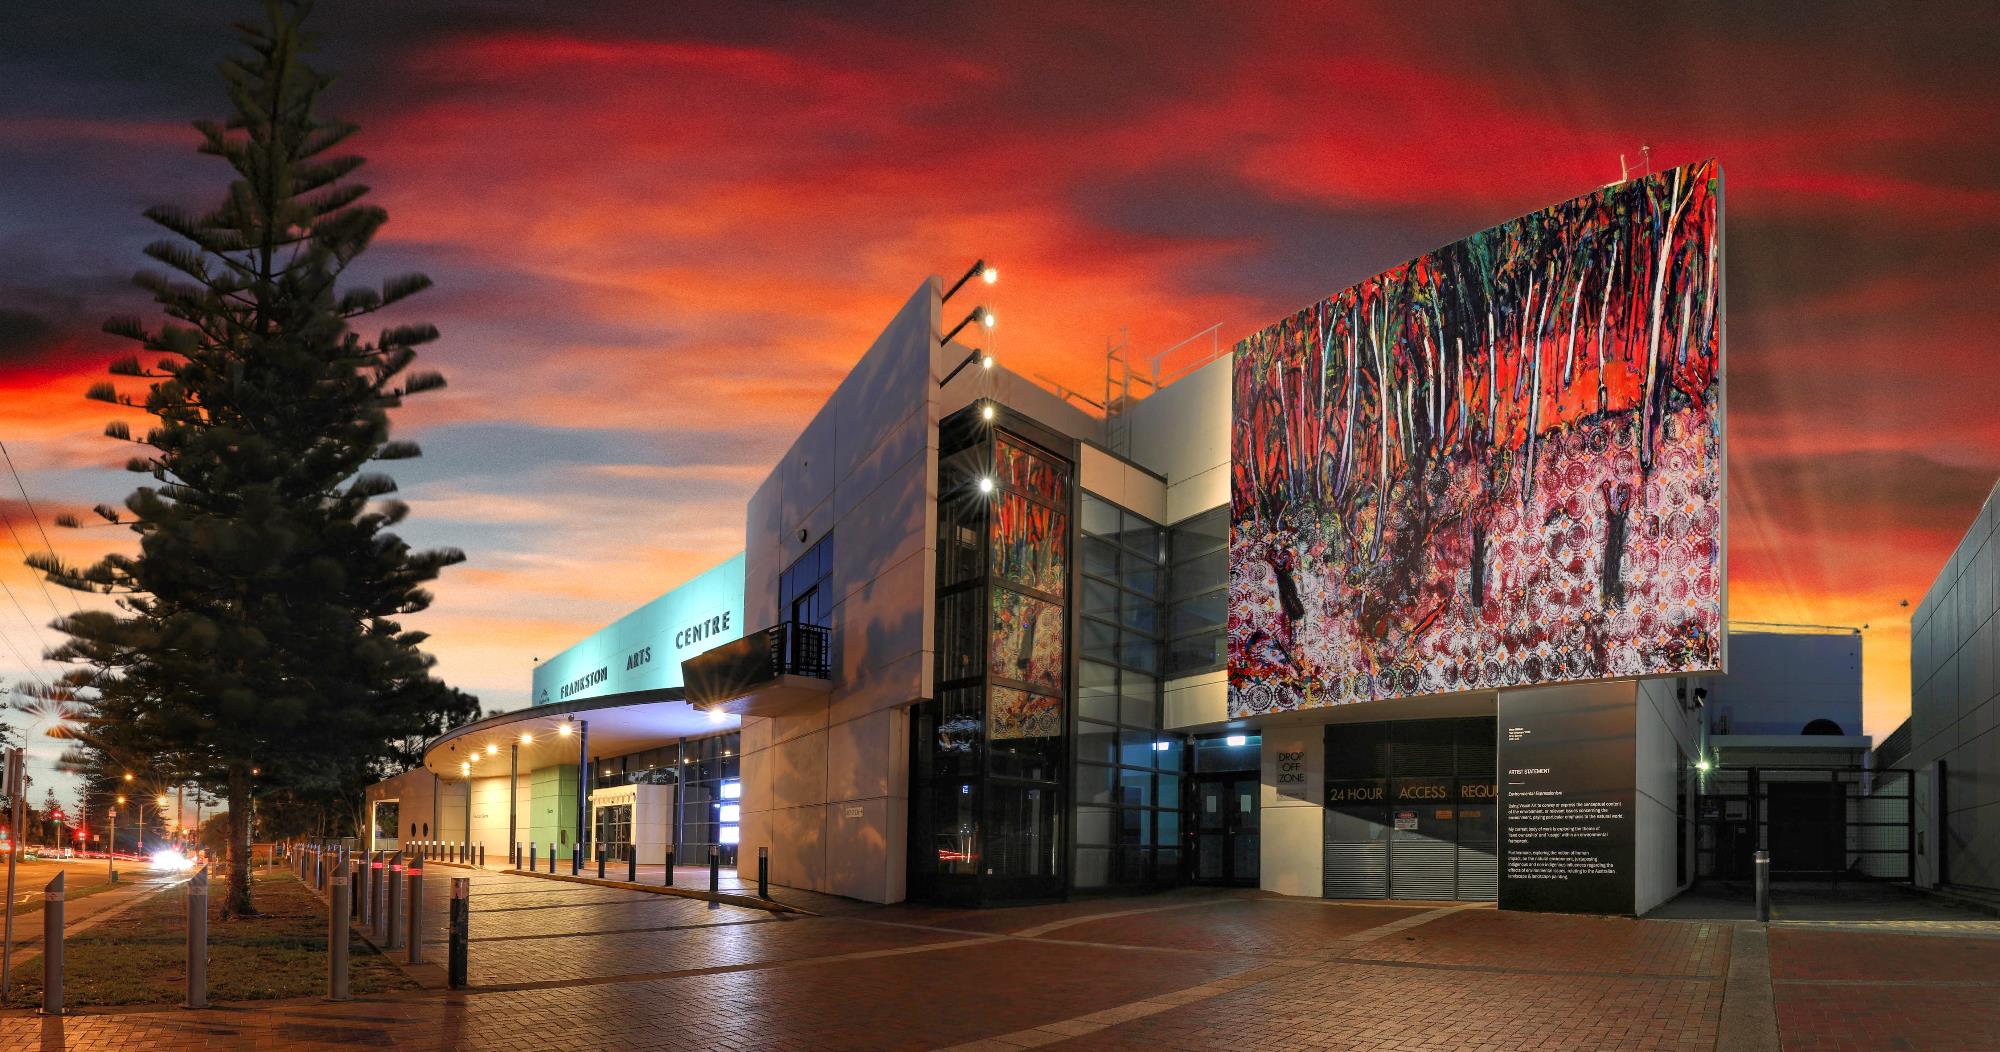 External view of Frankston Arts Centre with red sky